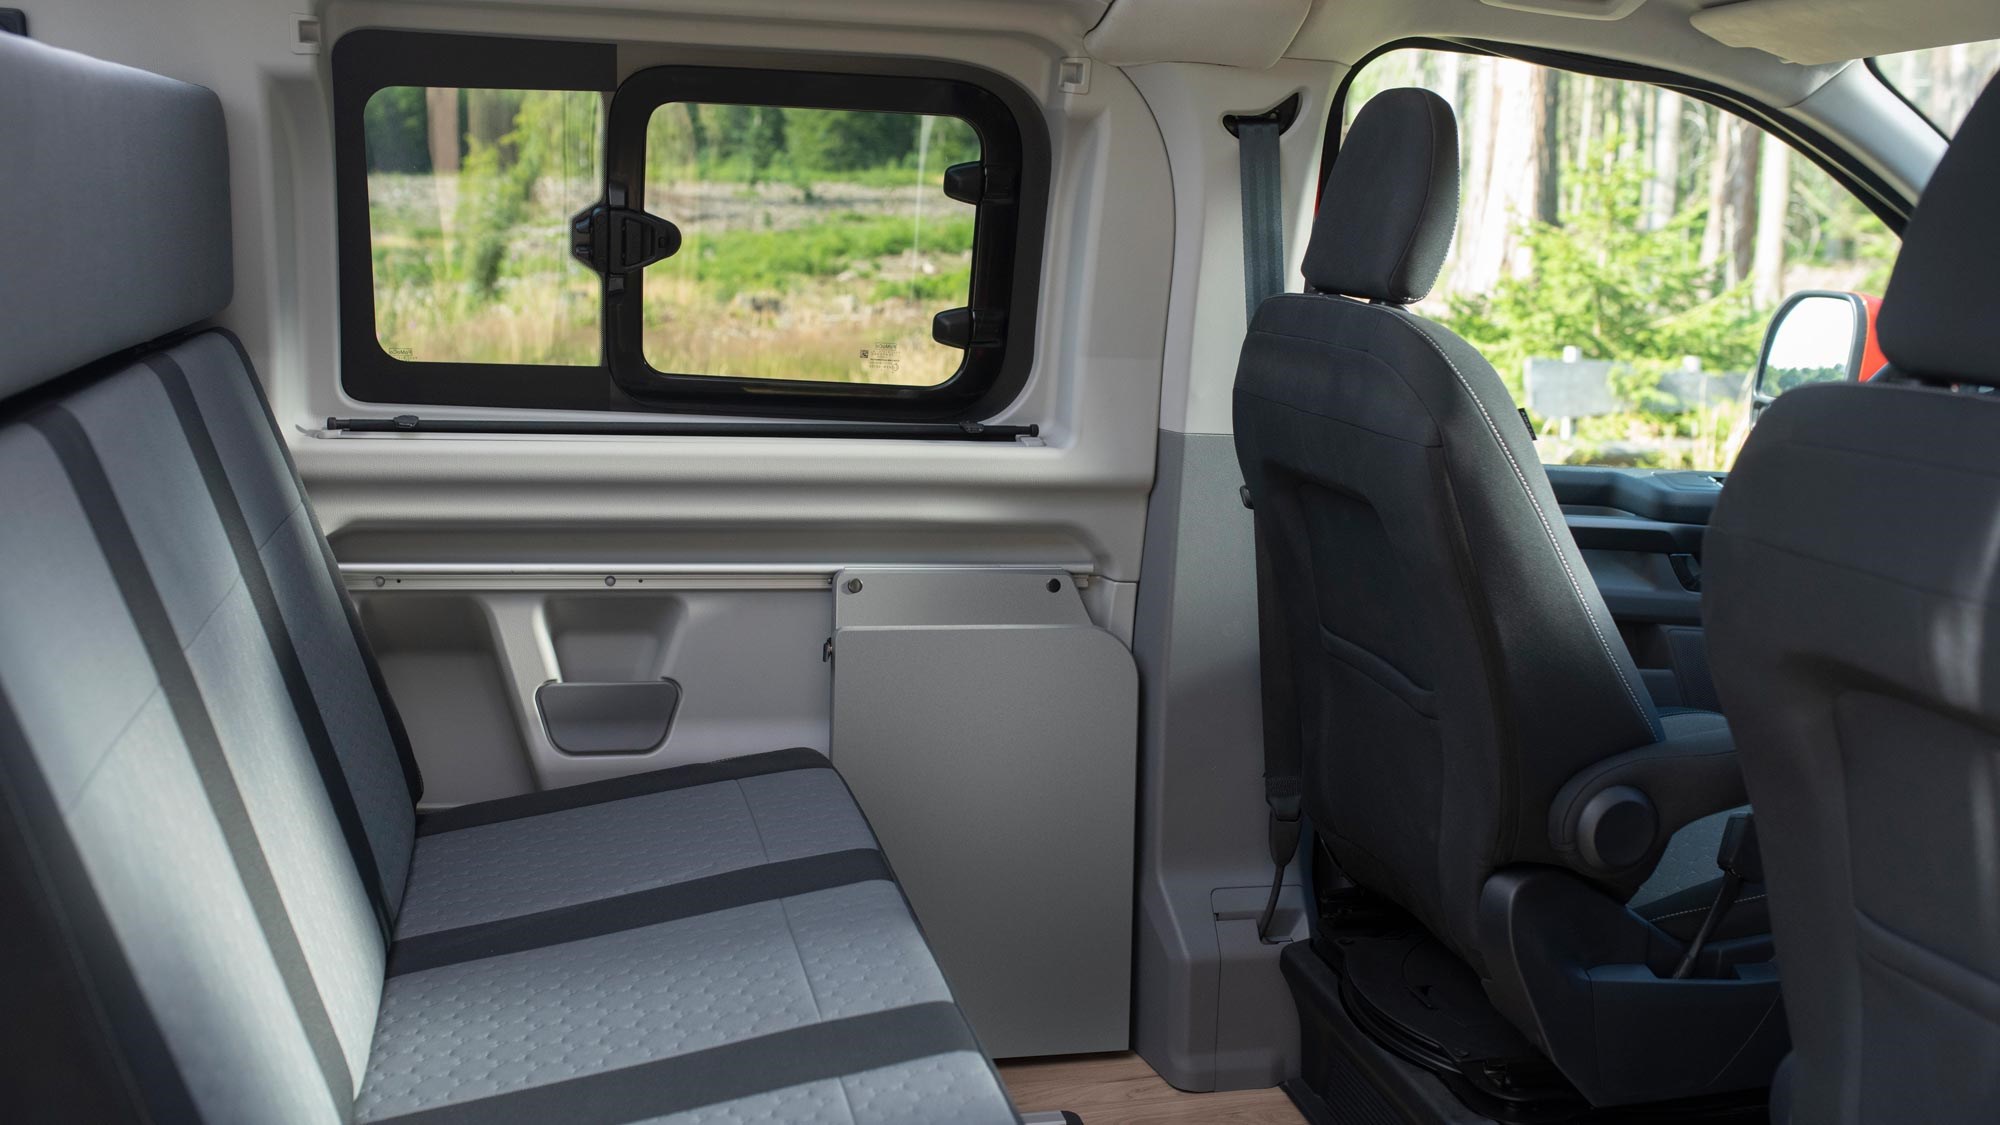 Ford Nugget Camper Van – the Transit you can sleep and shower in